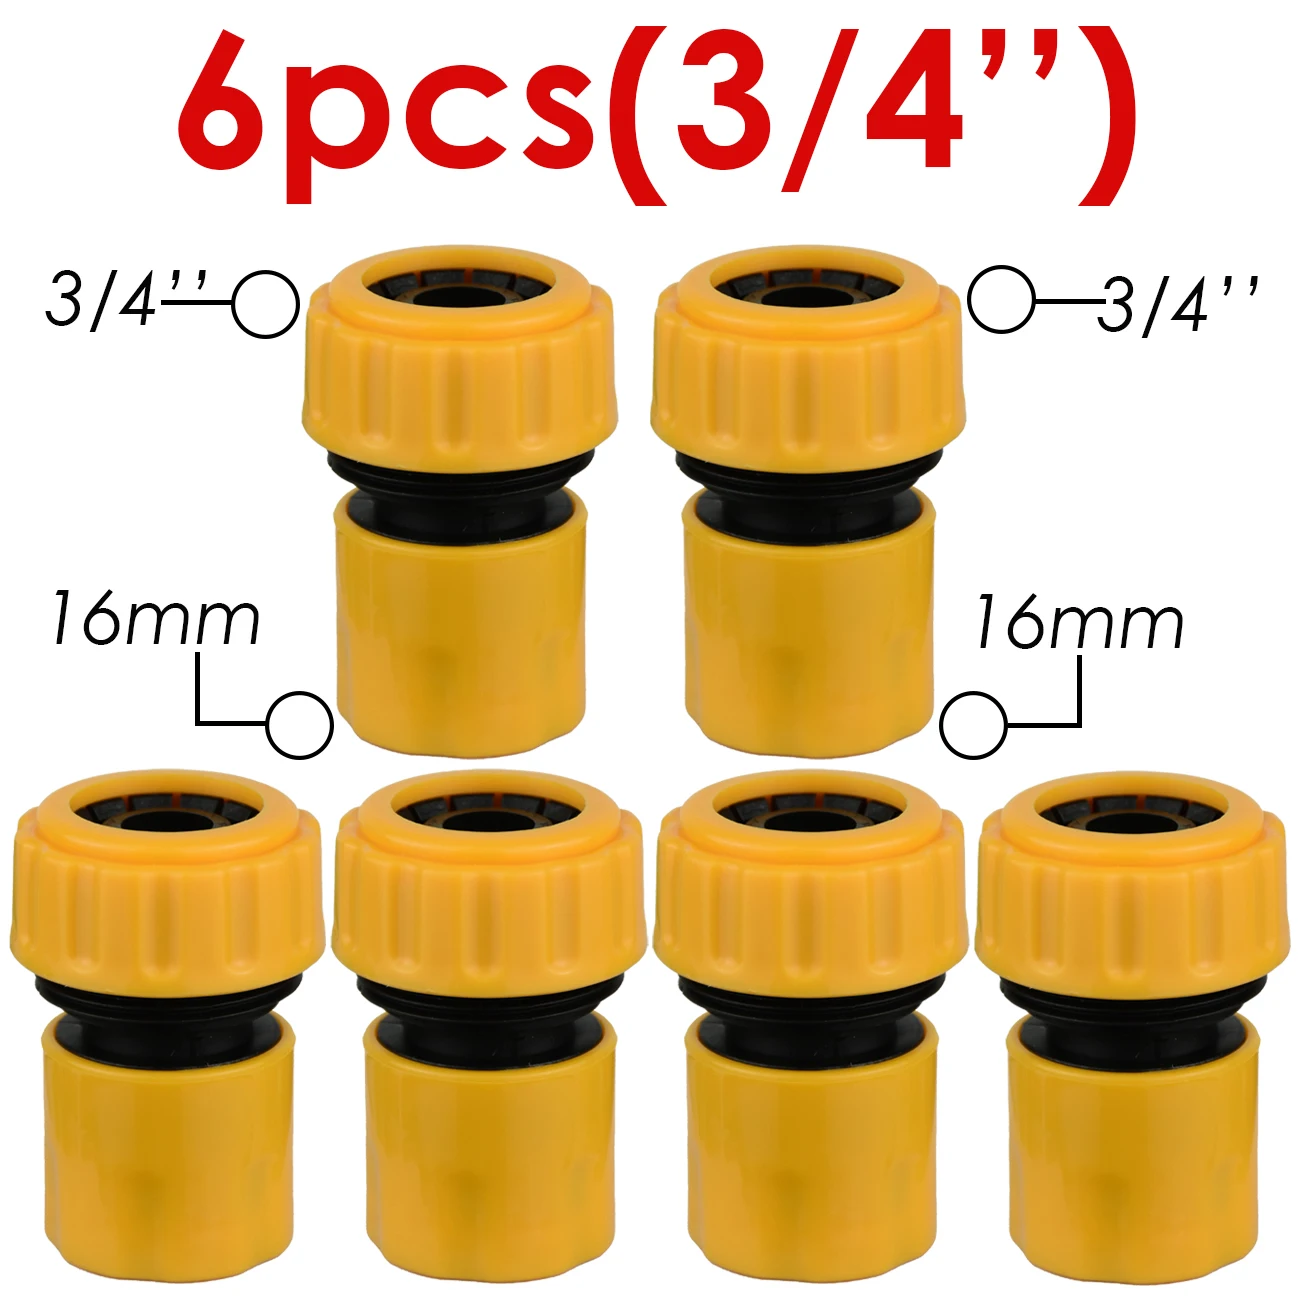 6PCS 3/4 1/2 inch Garden Hose Pipe Repair Connector Fitting Tubing Quick Connection for Drip Irrigation Watering Greenhouse images - 6